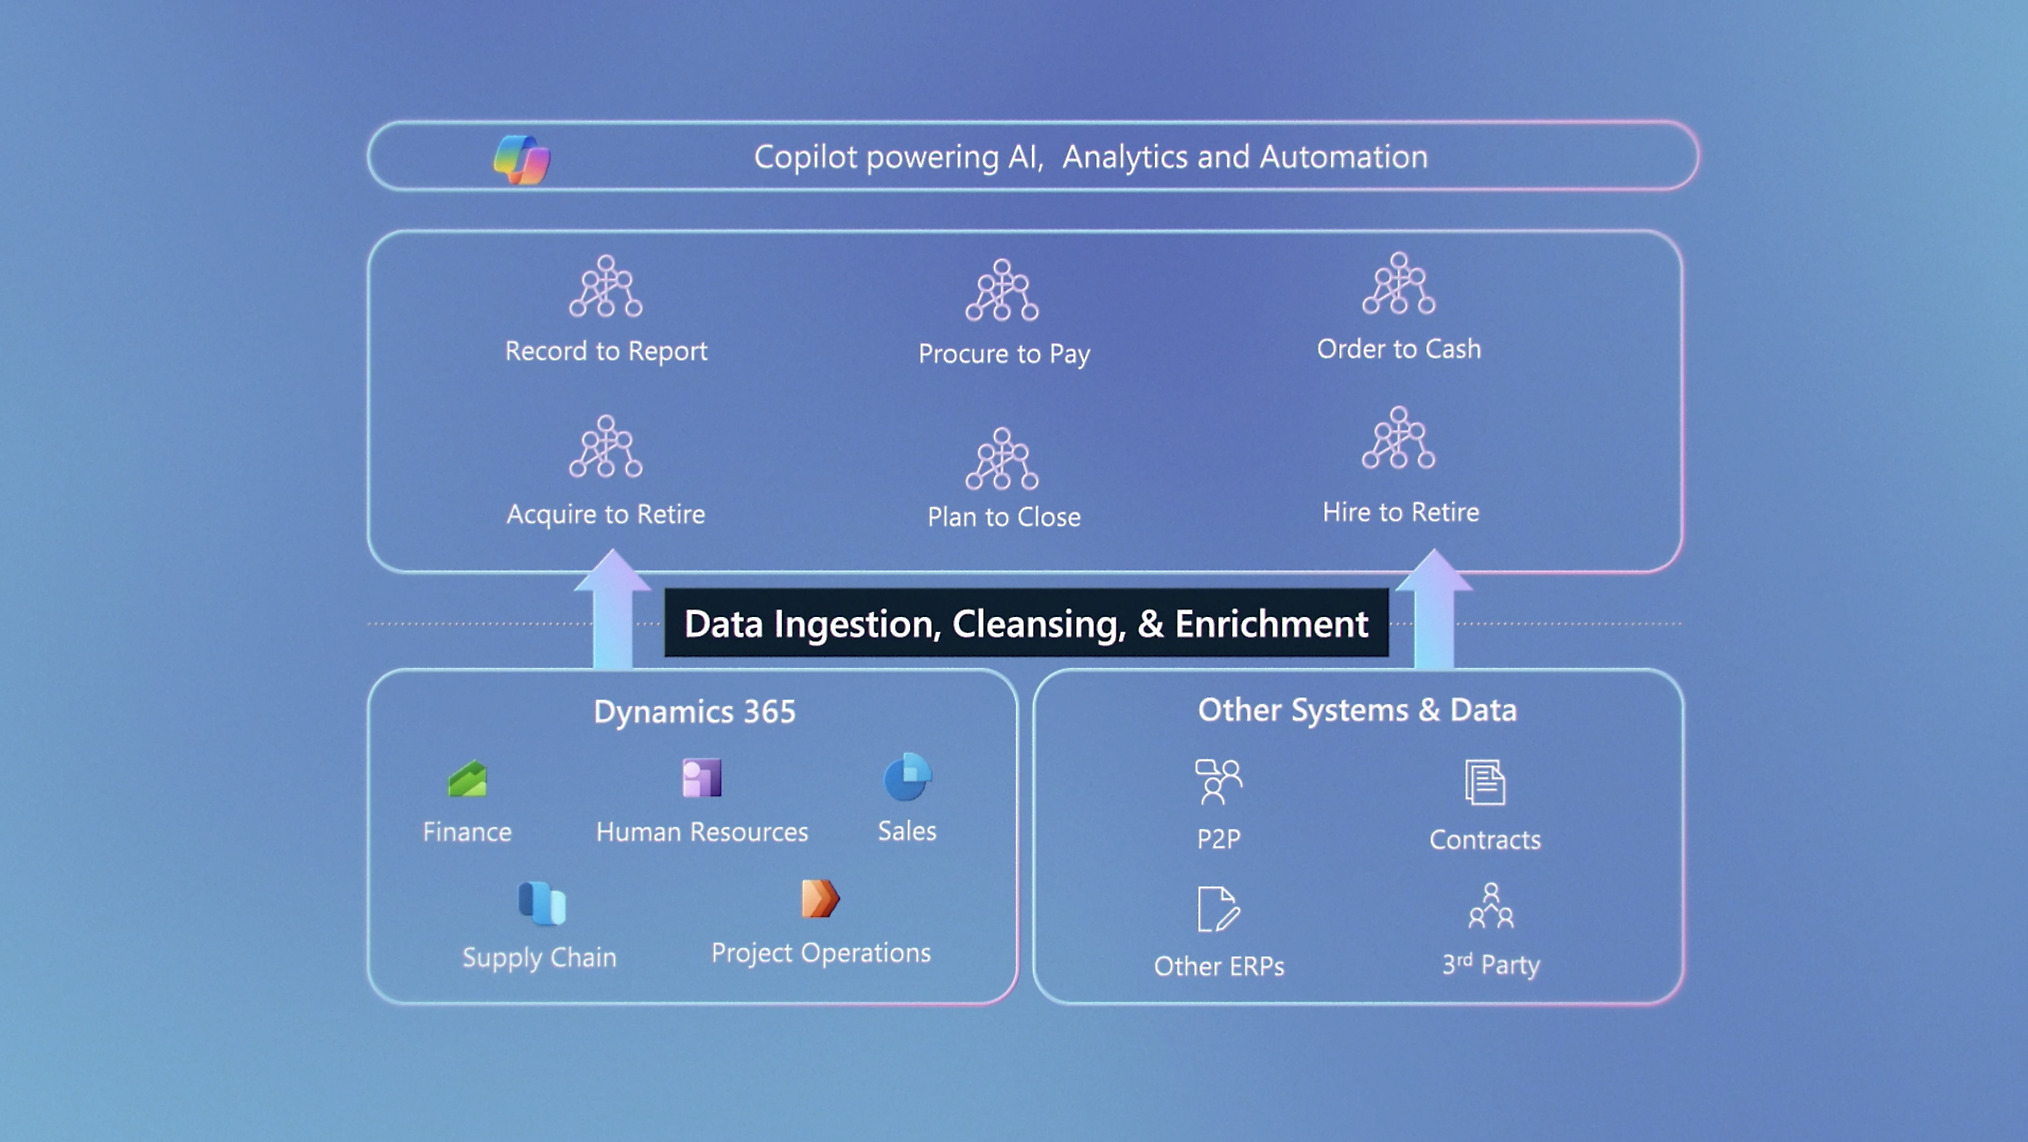 A screenshot of copilot powering AI, Analytics and Automation